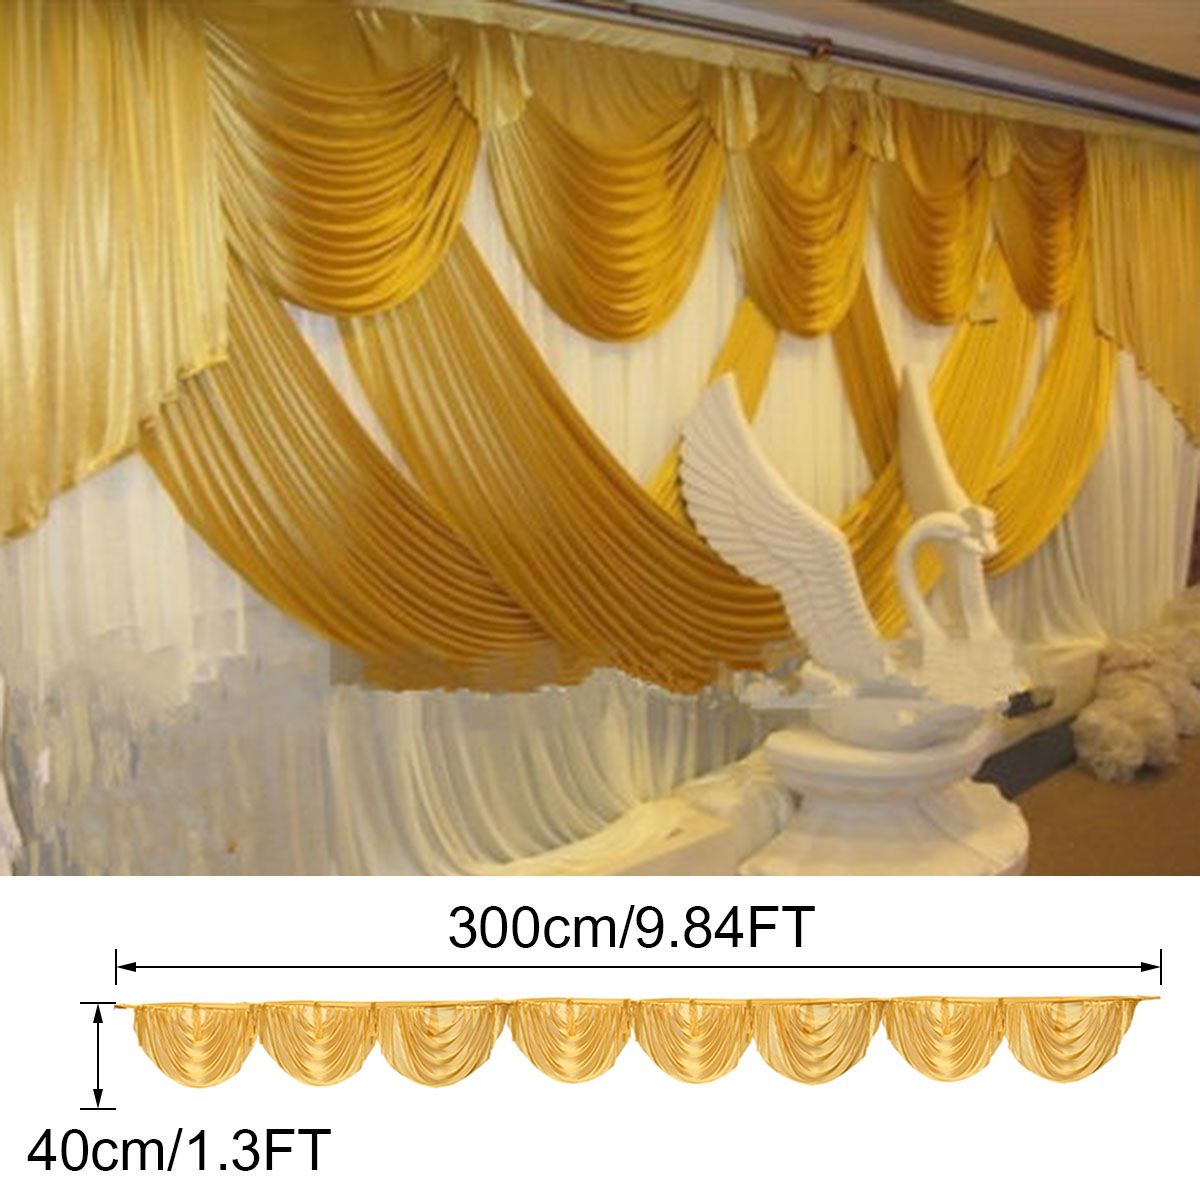 Customized-Gold-Ice-Silk-Satin-Wedding-Backdrop-Swags-Curtain-Party-Stage-Wedding-Decor-Supplies-1577650